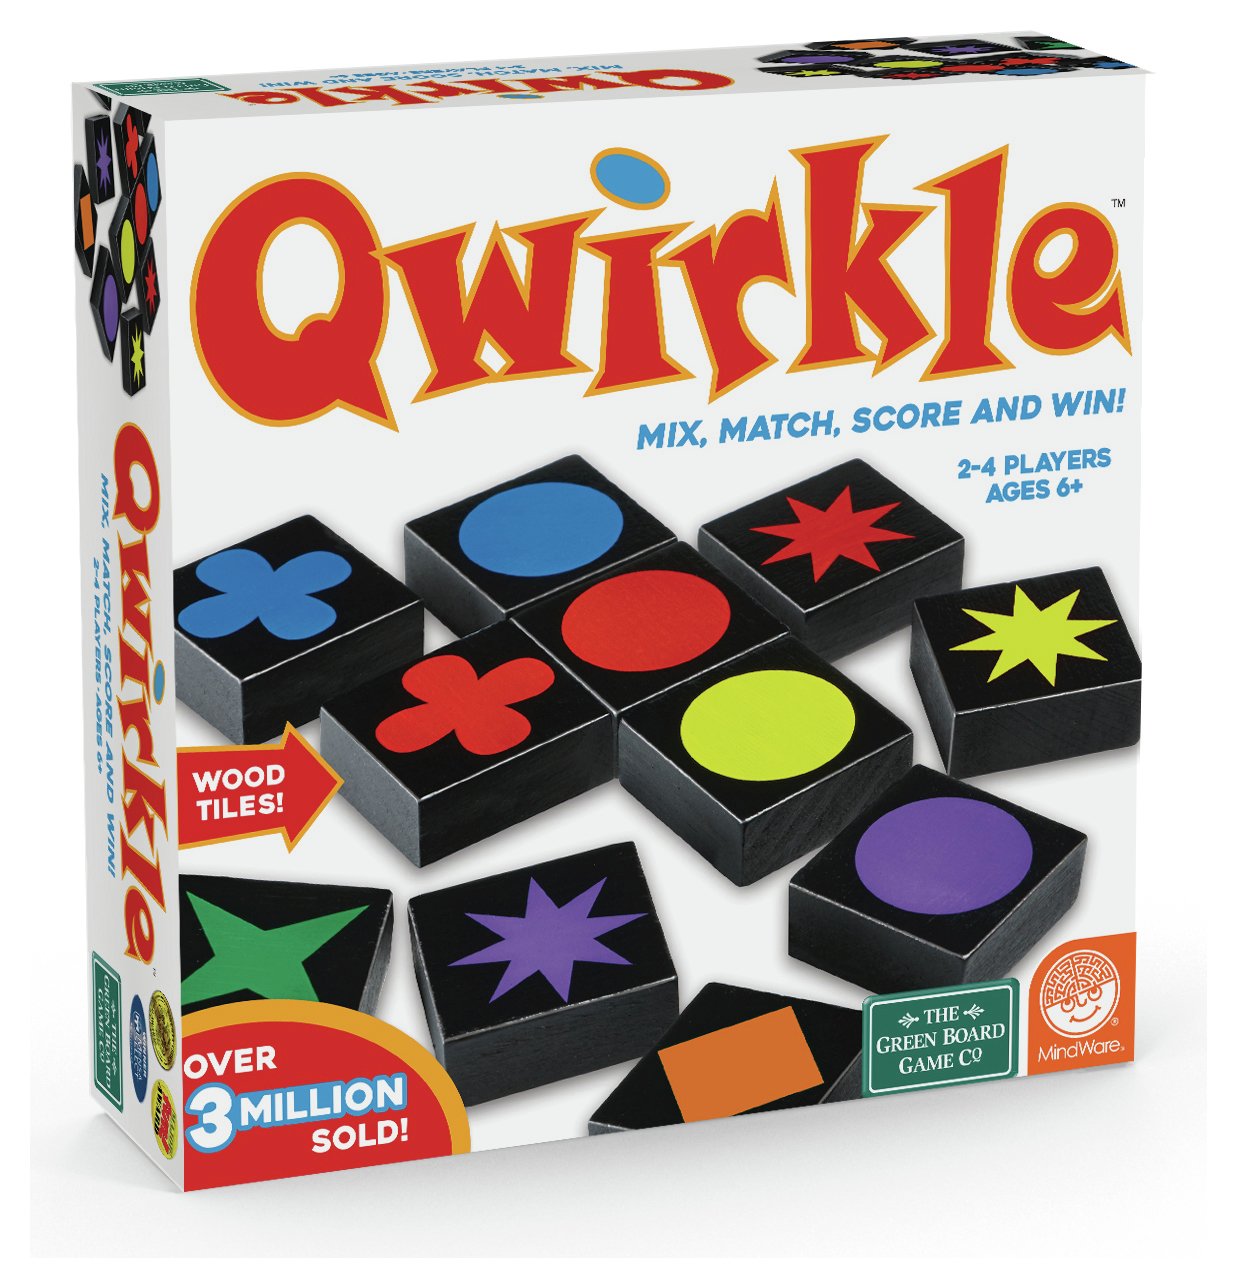 play qwirkle online for free